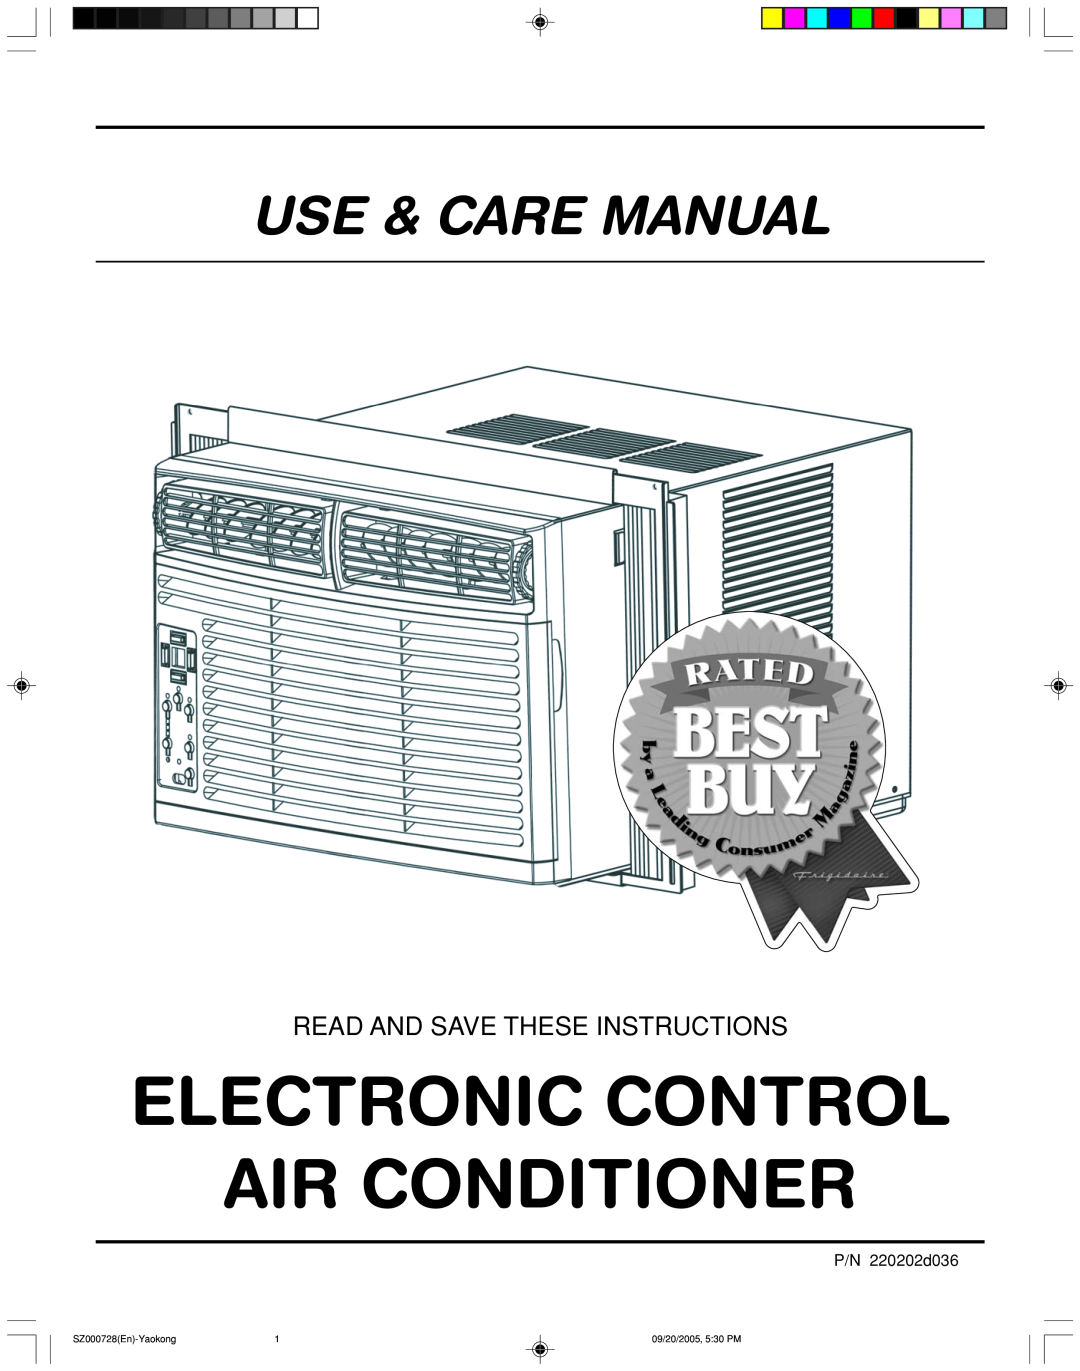 Frigidaire ELECTRONIC CONTROL AIR CONDITIONER manual Electronic Control Air Conditioner, Use & Care Manual, P/N 220202d036 